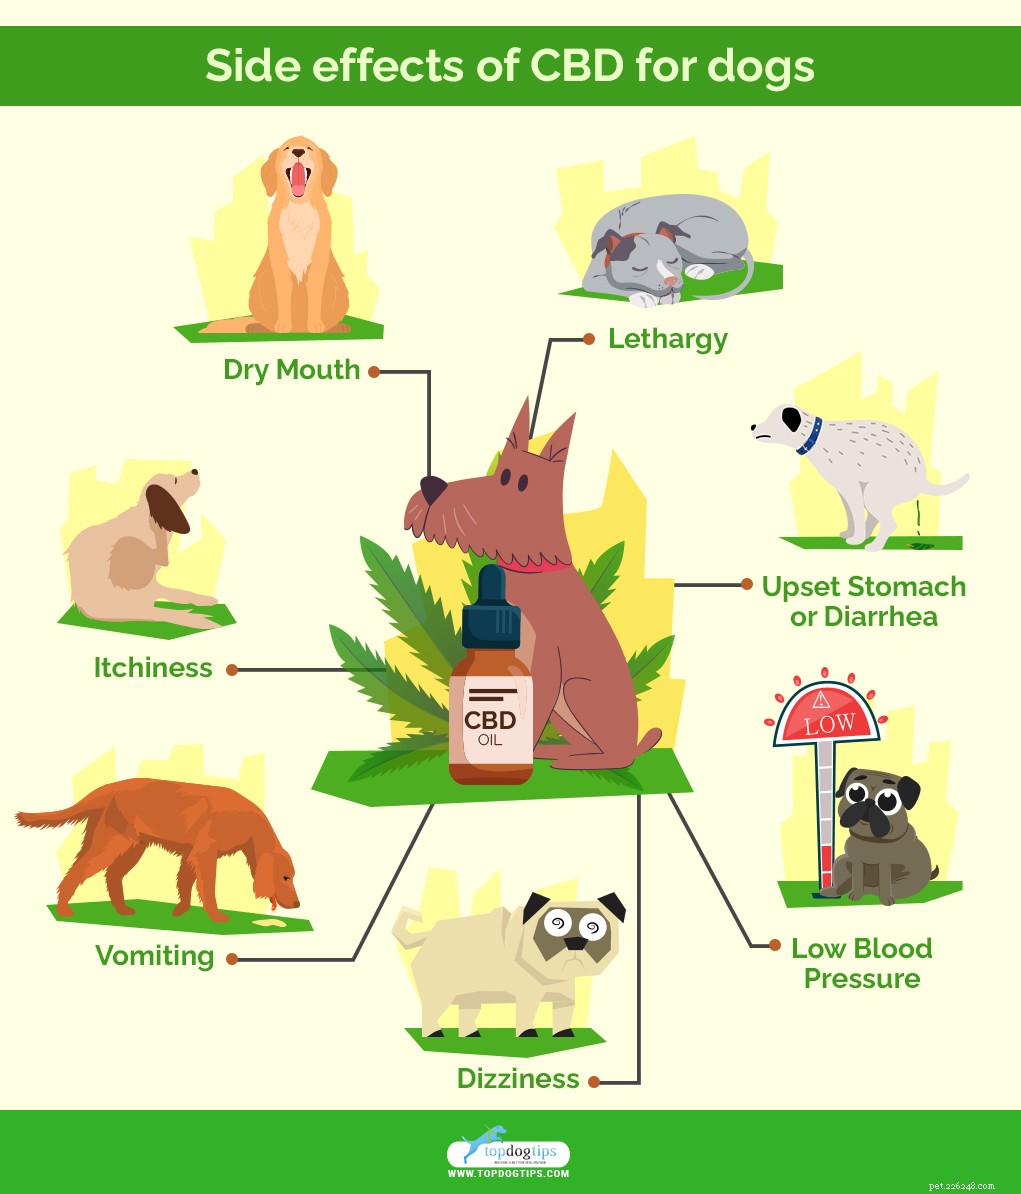 CBD for Dogs：The Definitive Guide